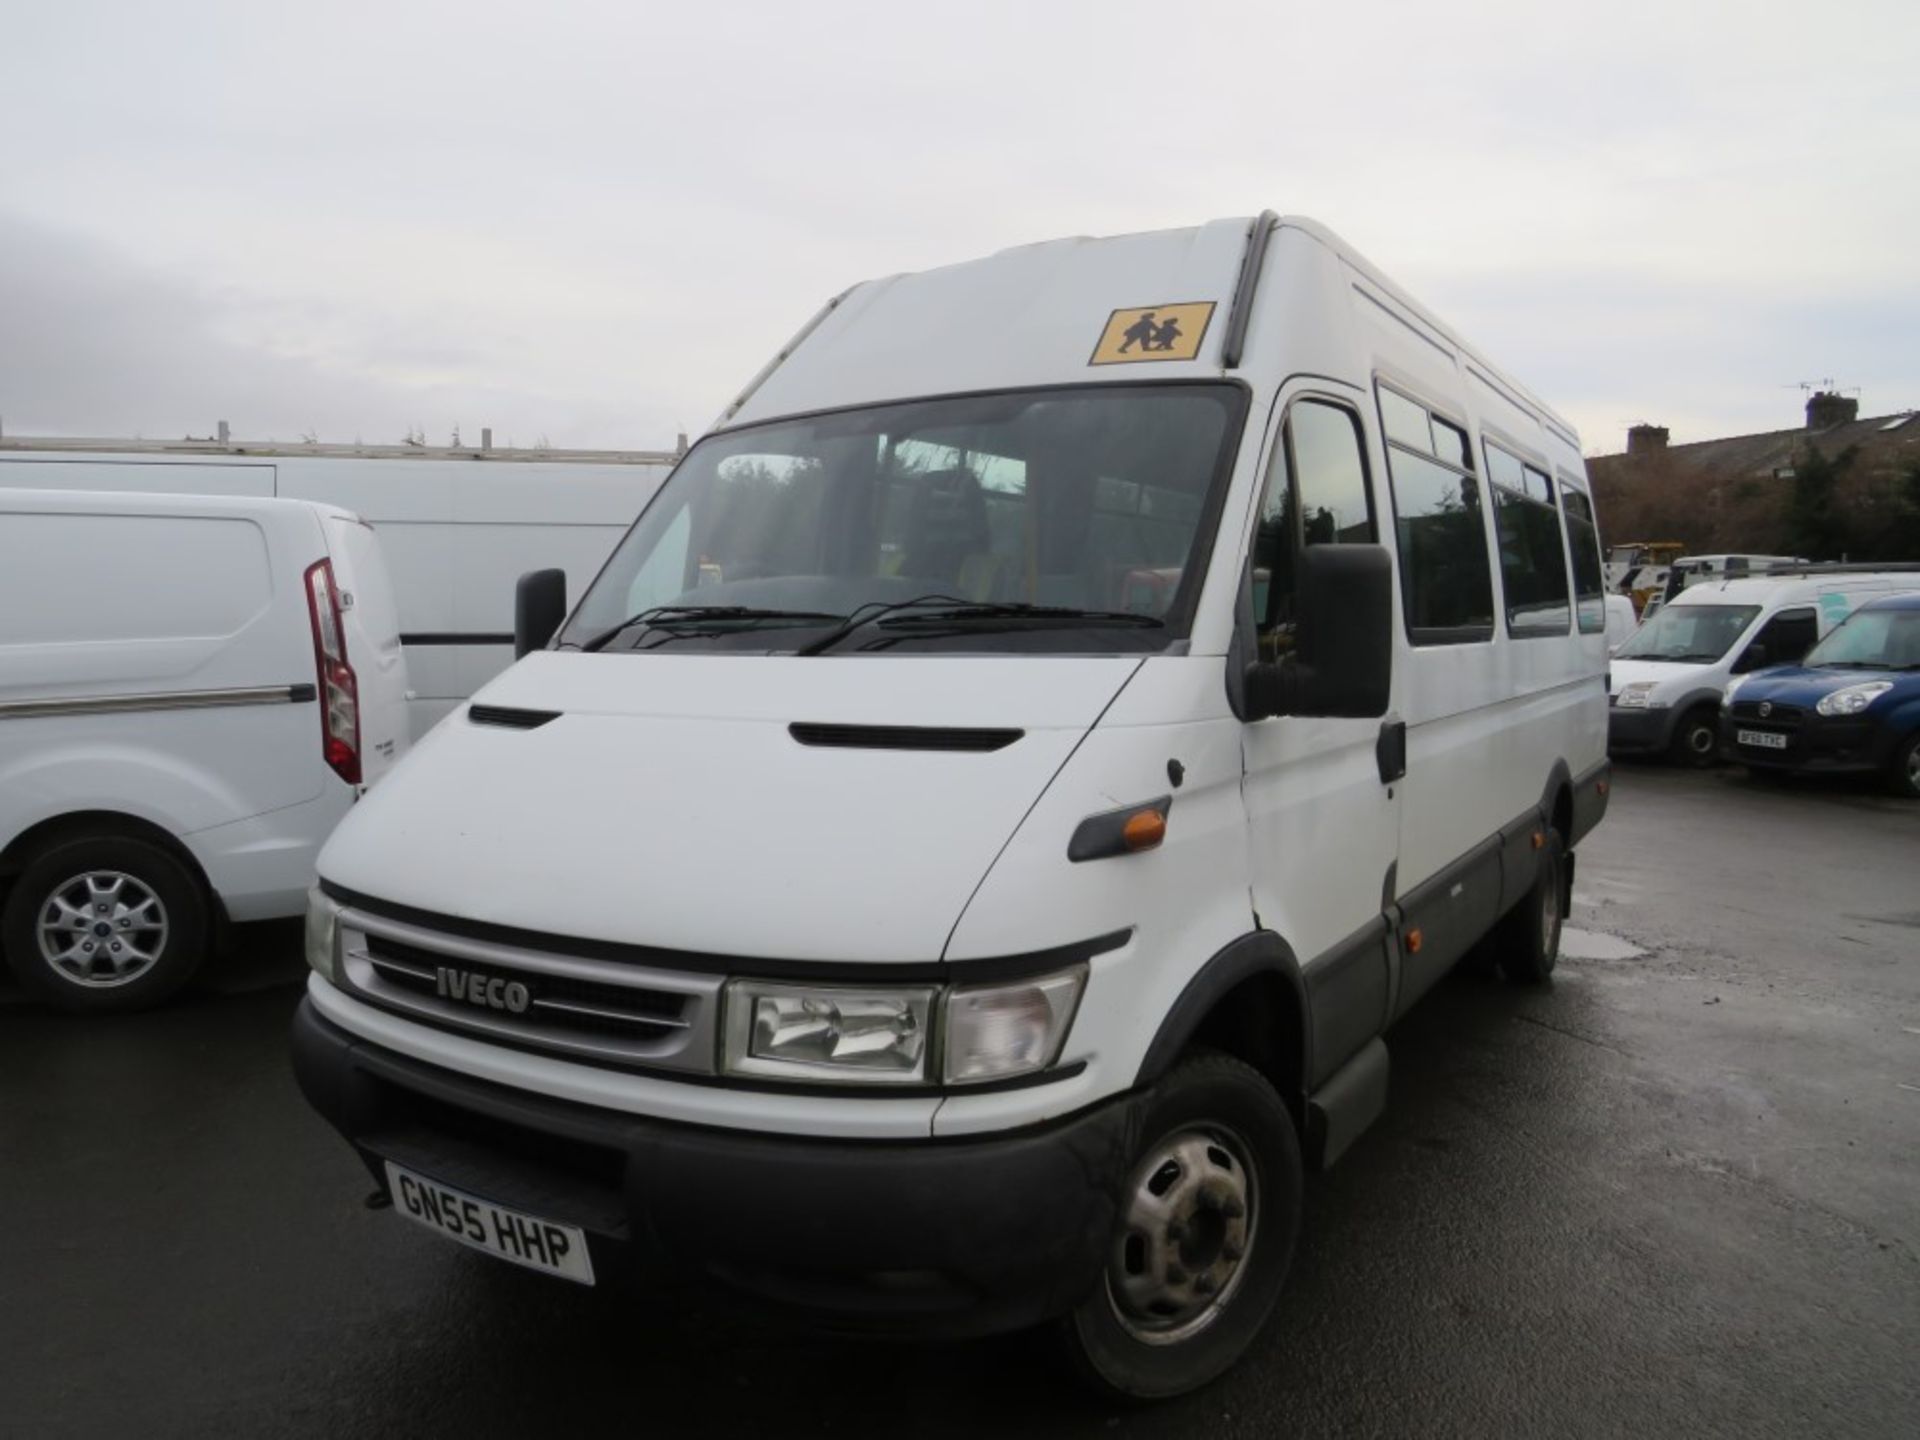 55 reg IVECO DAILY 50C13 MINIBUS, 1ST REG 12/05, TEST 04/20, 268353KM NOT WARRANTED, V5 HERE, 1 - Image 2 of 6